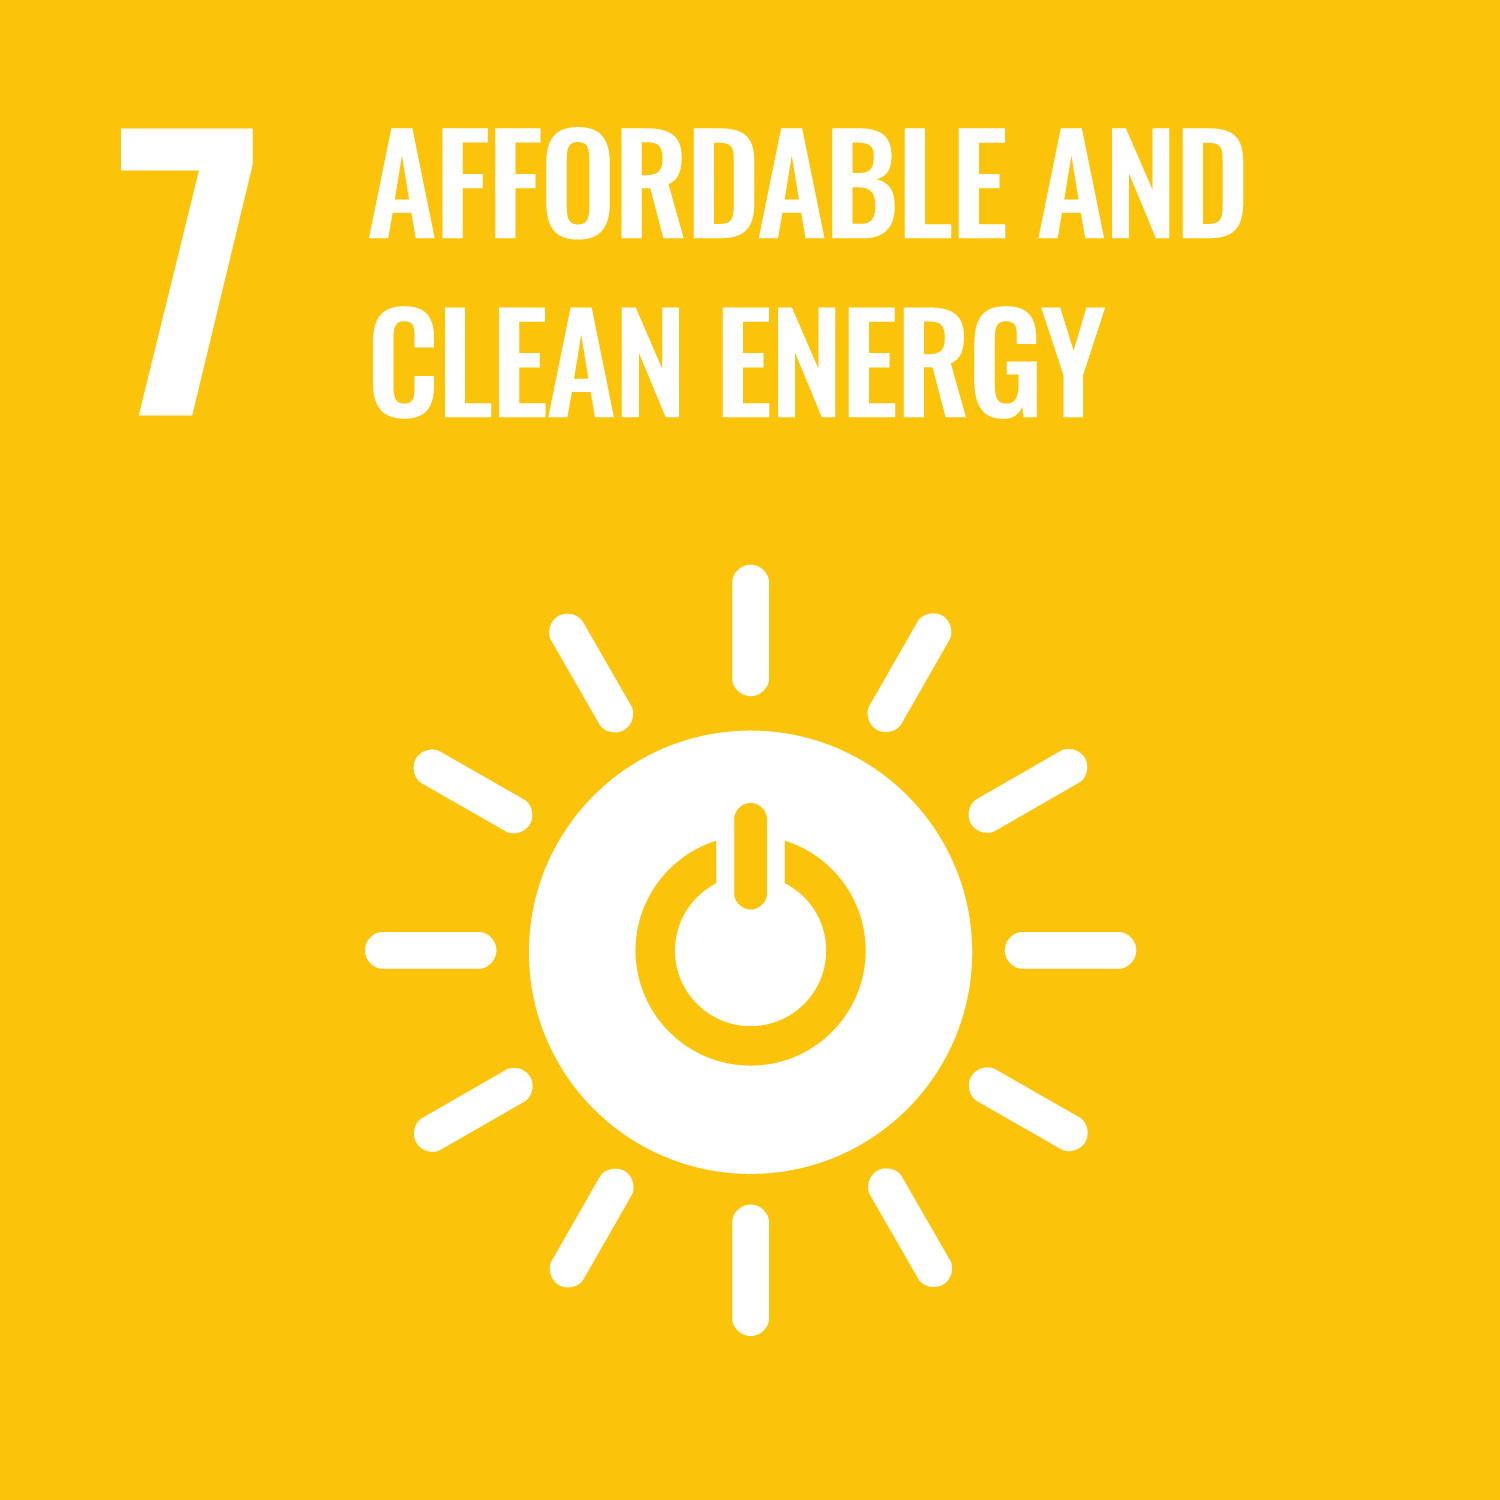 7 - Affordable and Clean Energy